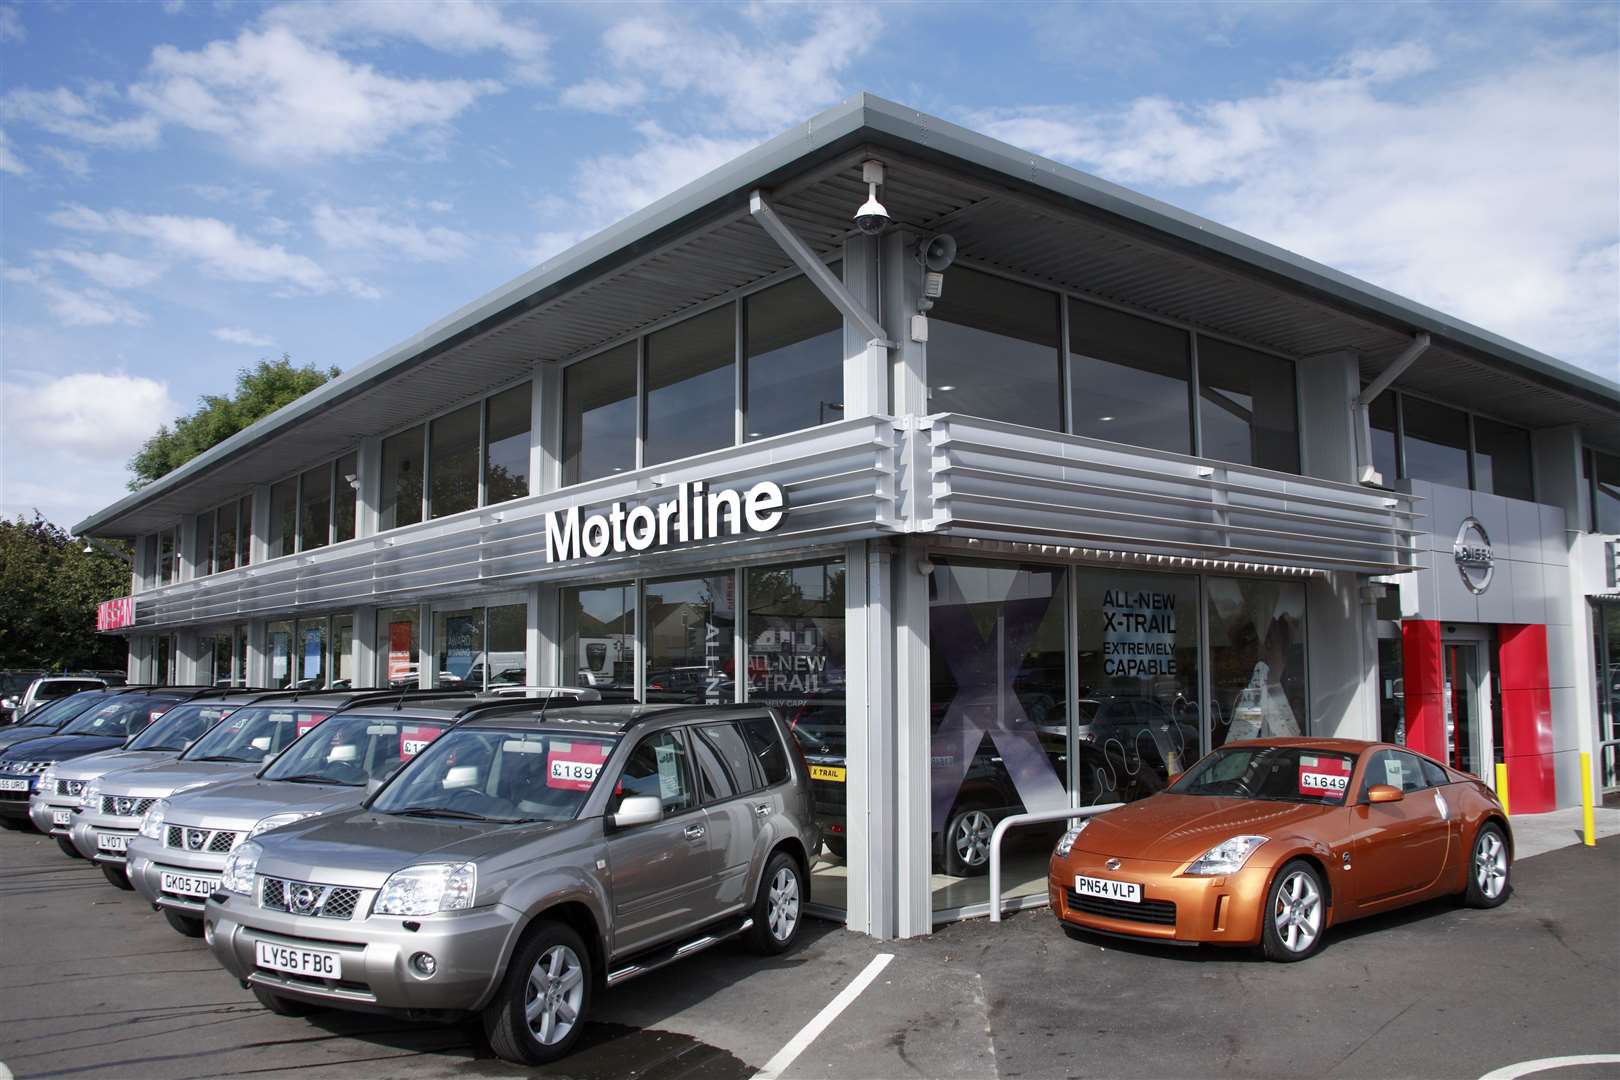 Motorline has a host of motor dealership across the county and UK